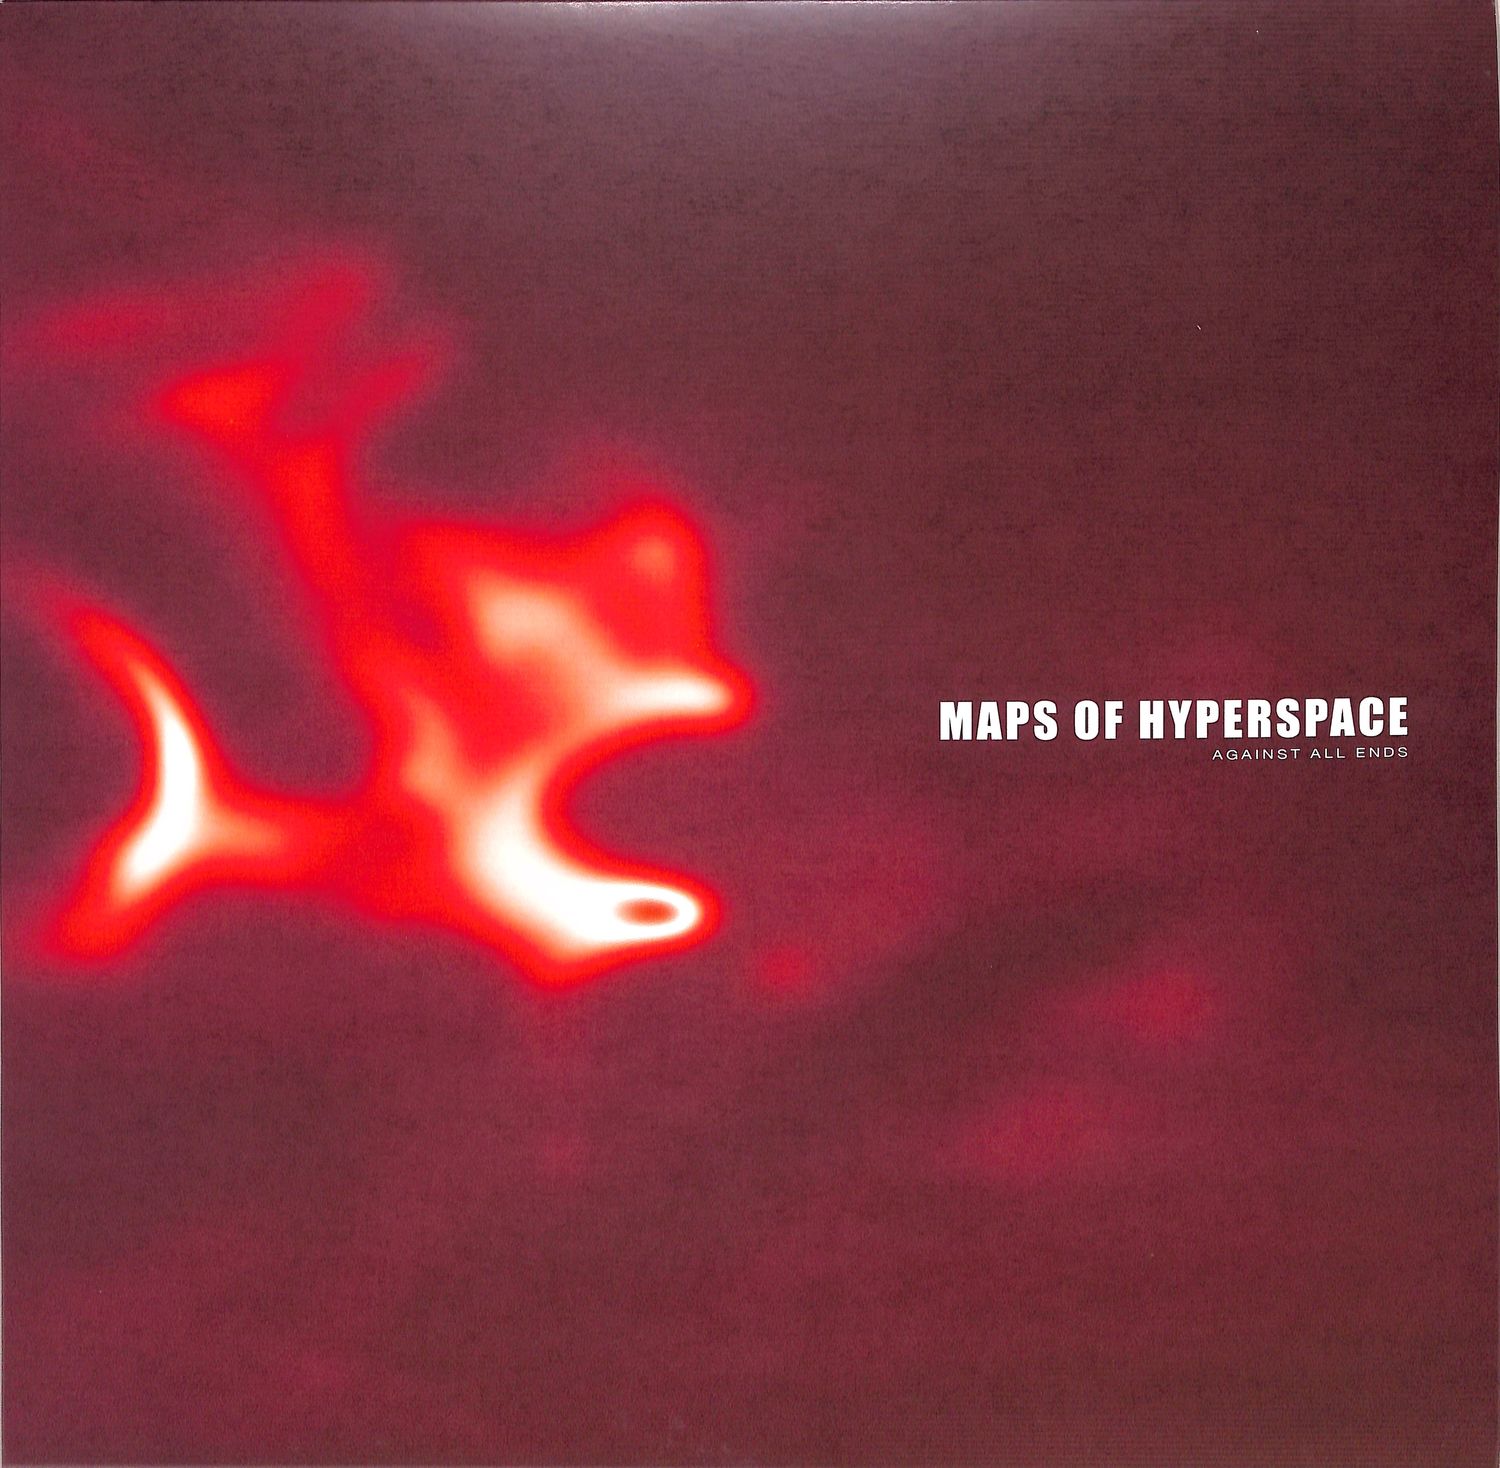 Maps Of Hyperspace - AGAINST ALL ENDS LP